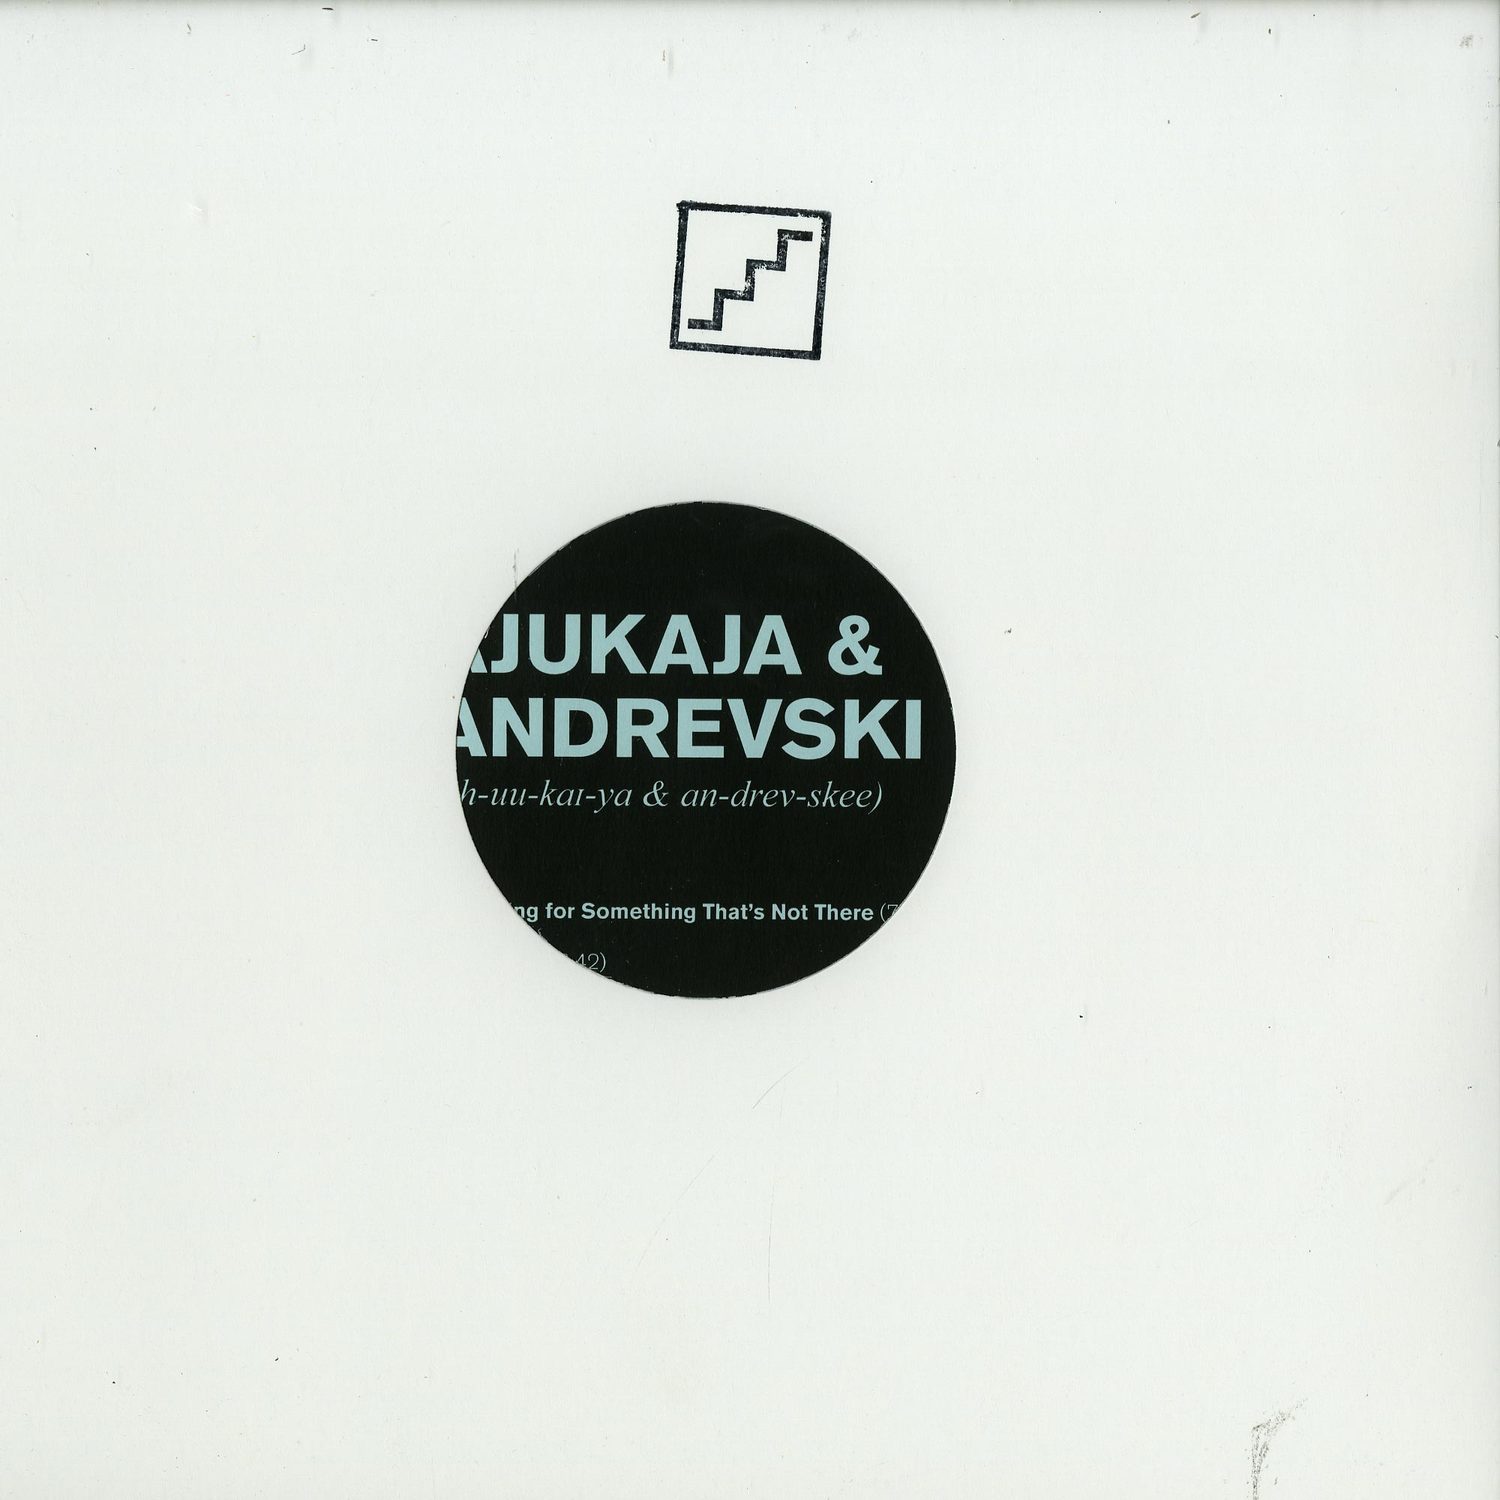 Ajukaja & Andrevski - LOOKING FOR SOMETHING THATS NOT THERE / MESILIND 